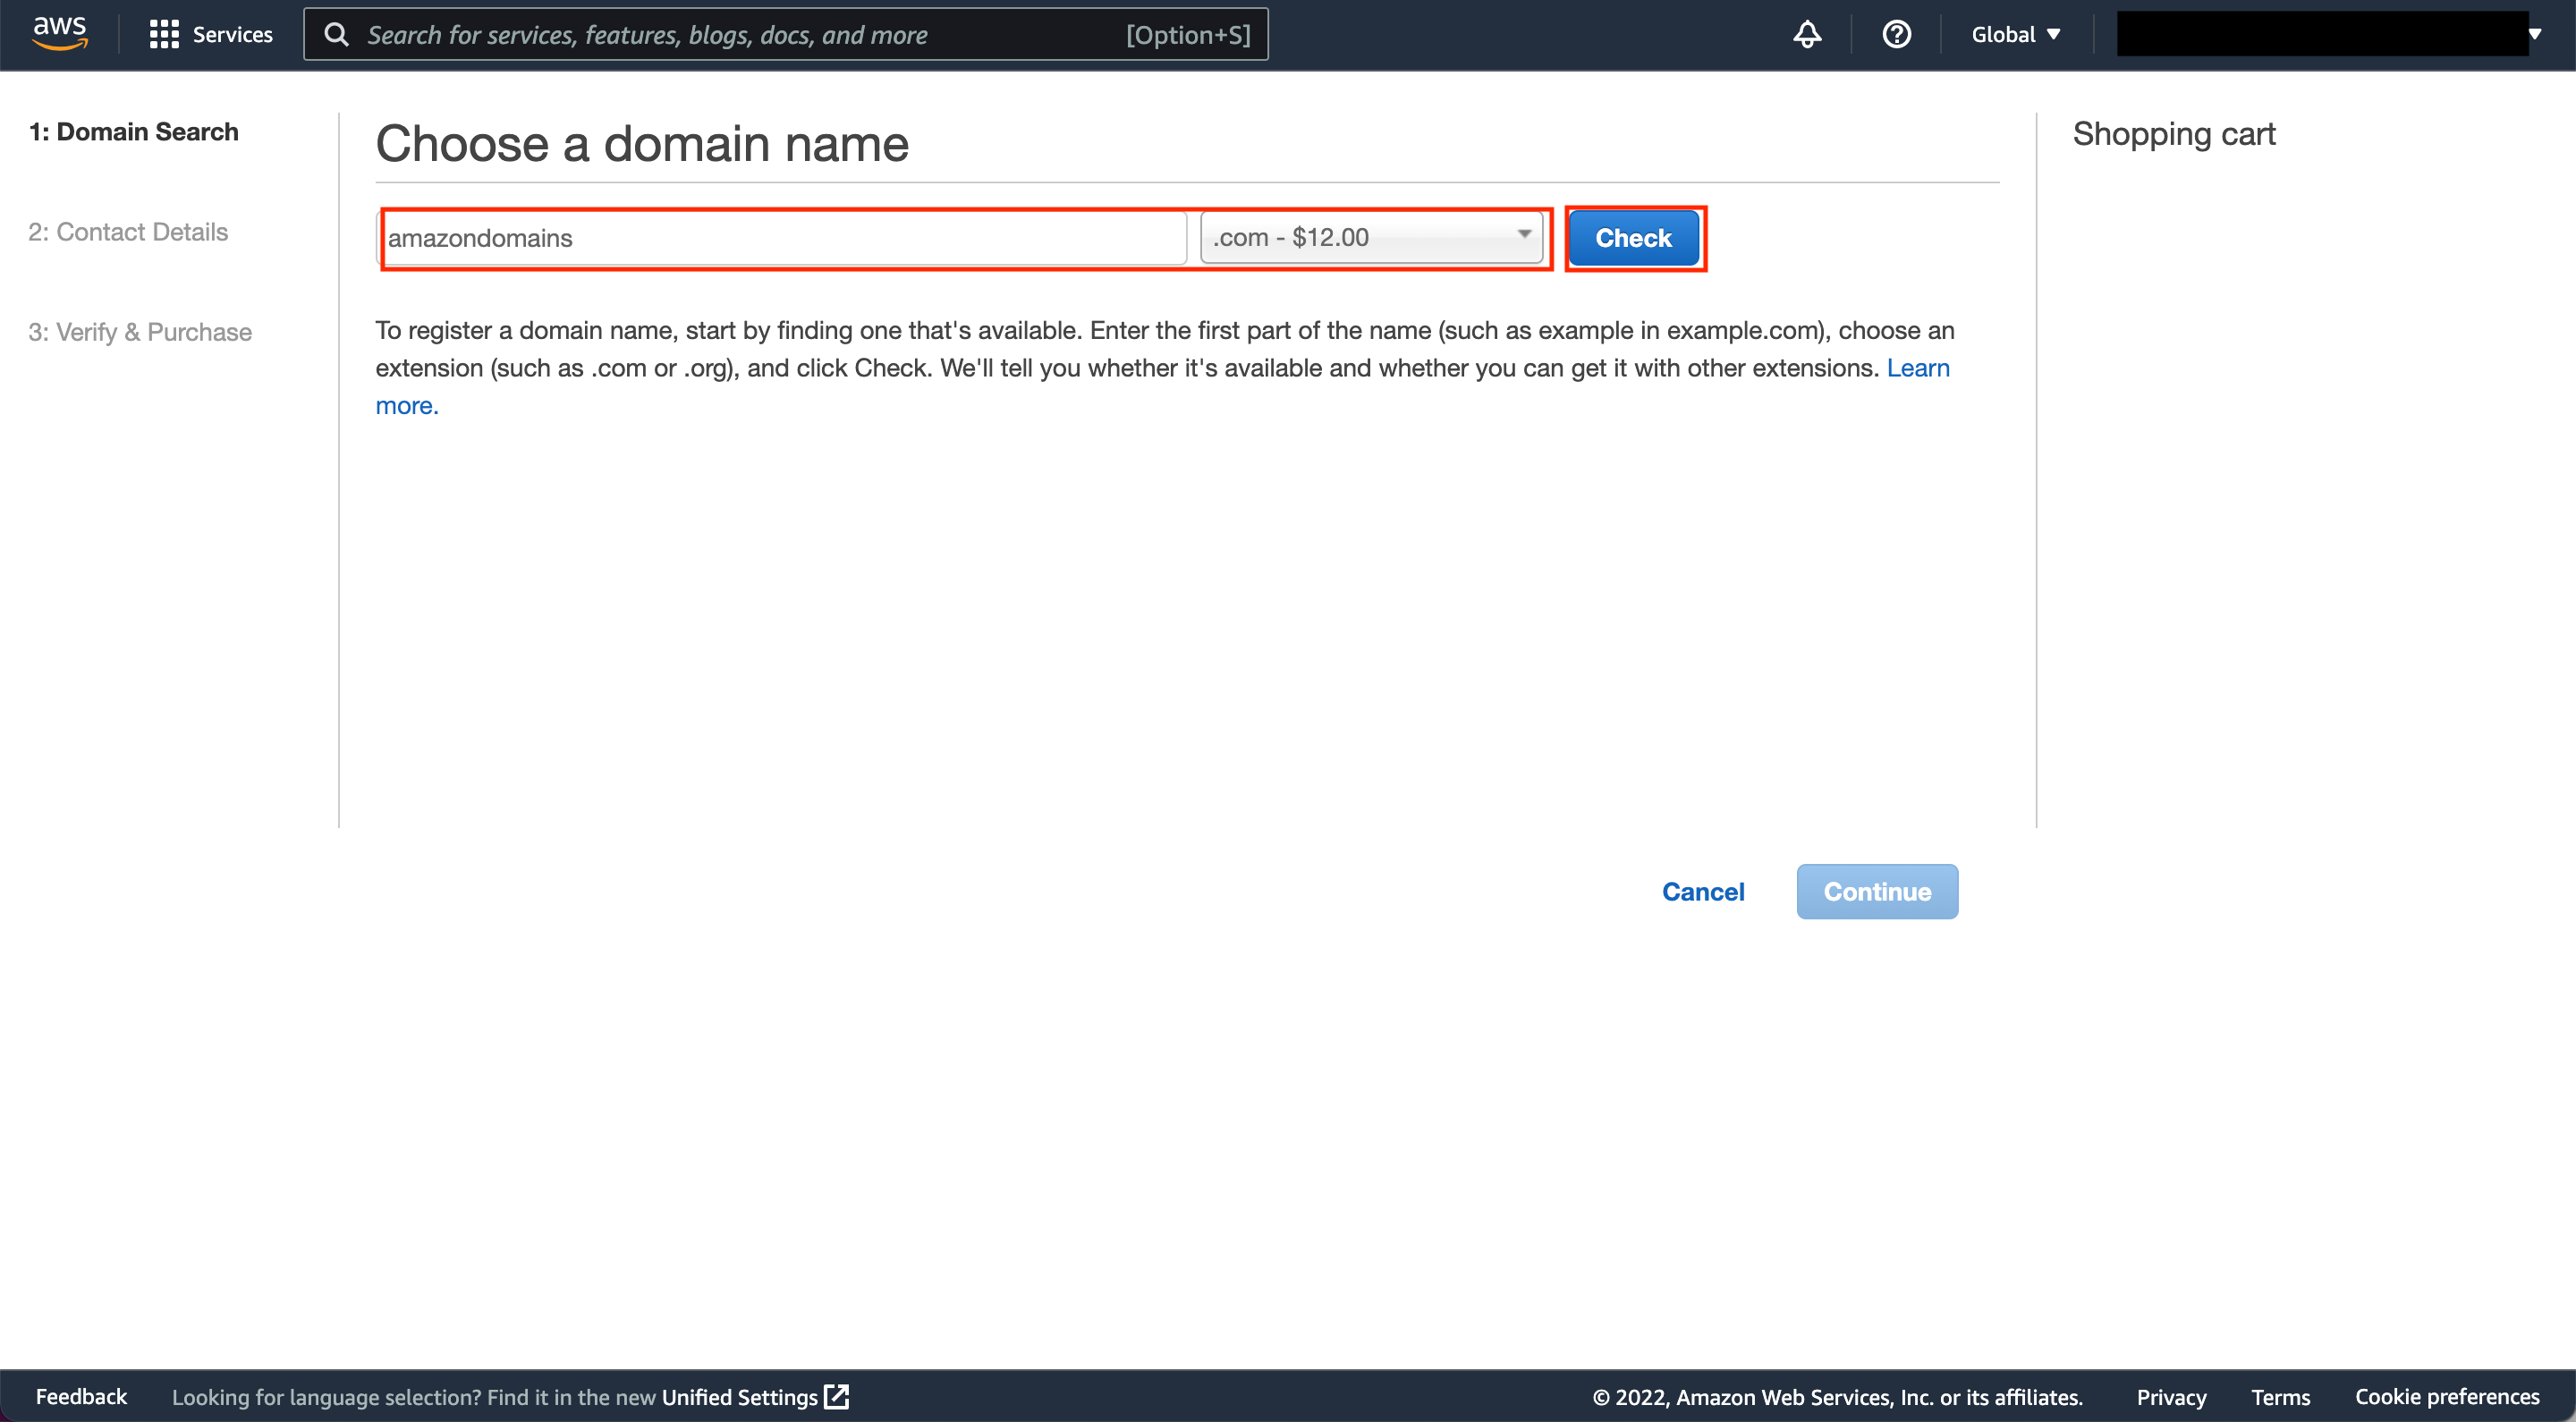 Step 1: Buying a Domain